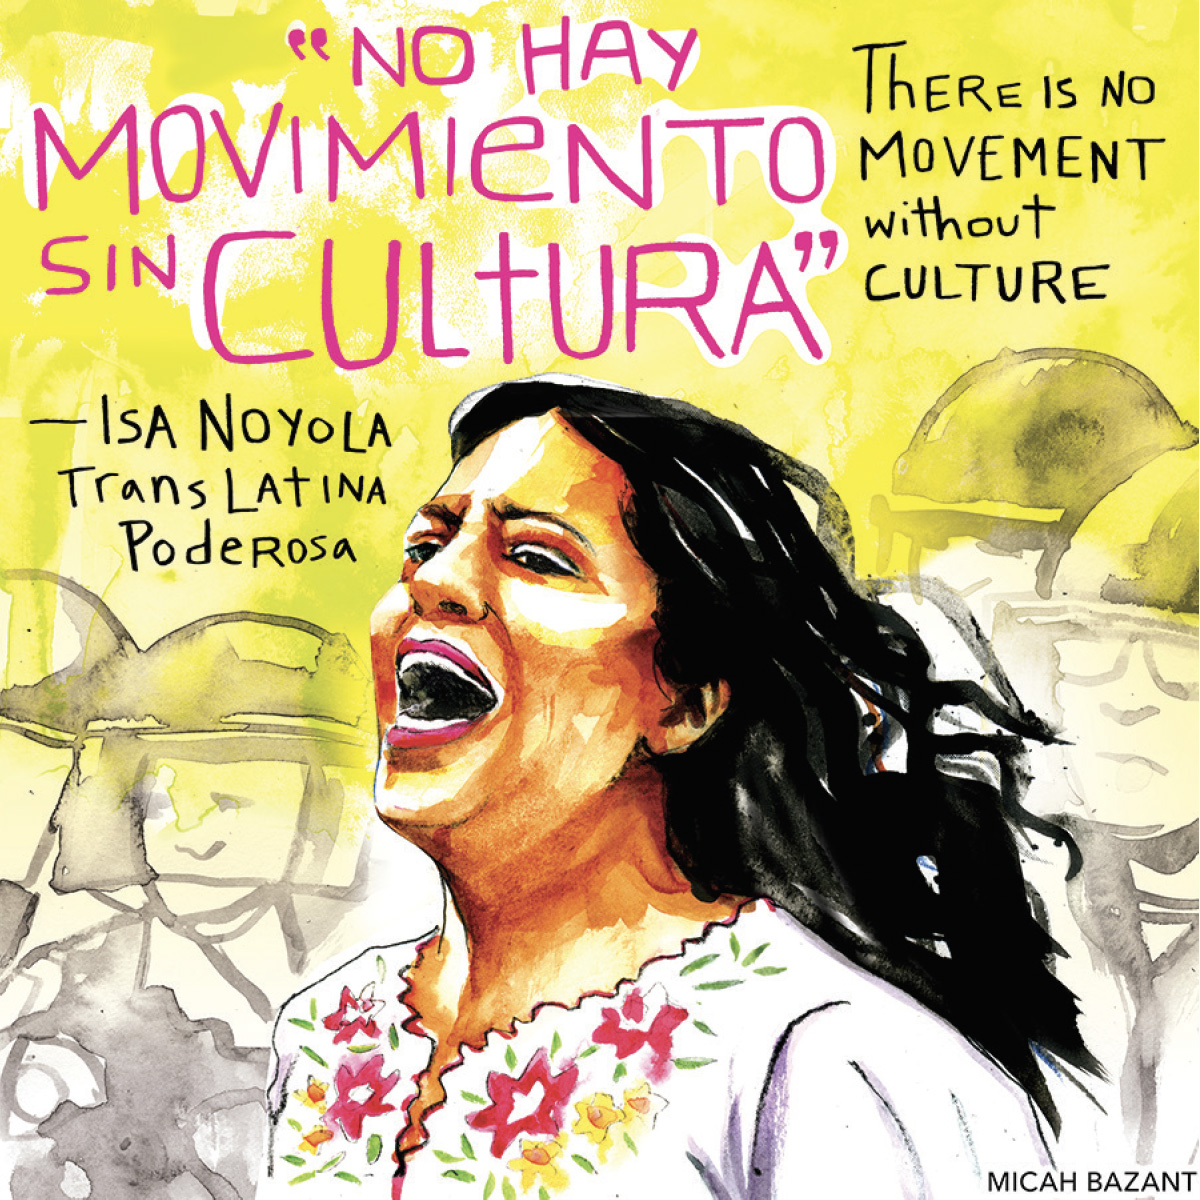 There is no movement without culture - Isa Noyola, Trans Latina Poderosa